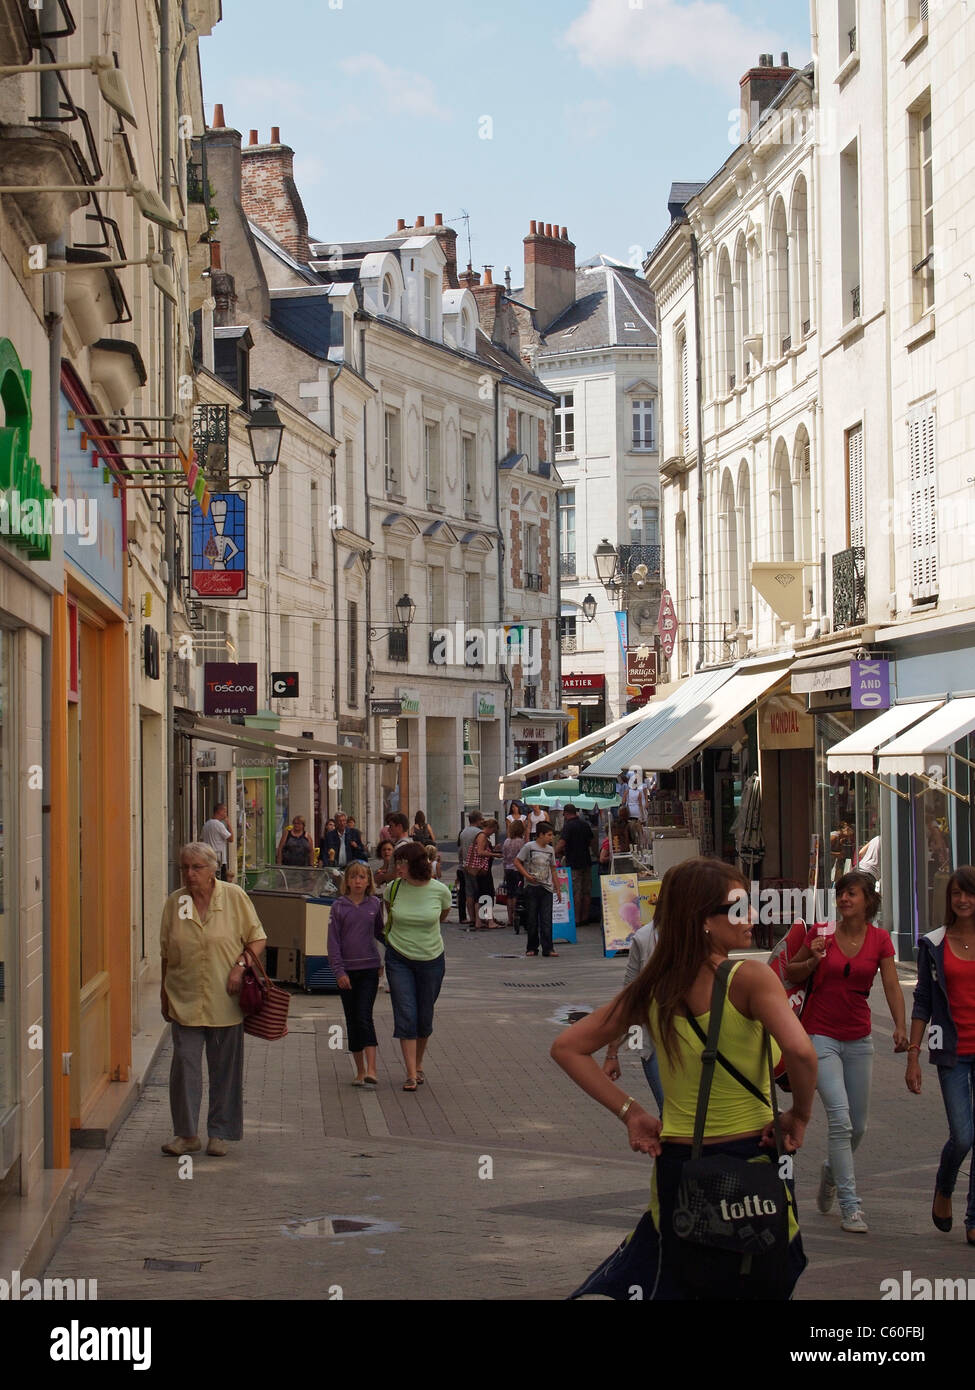 Shopping street in Blois, Loire valley, France Stock Photo